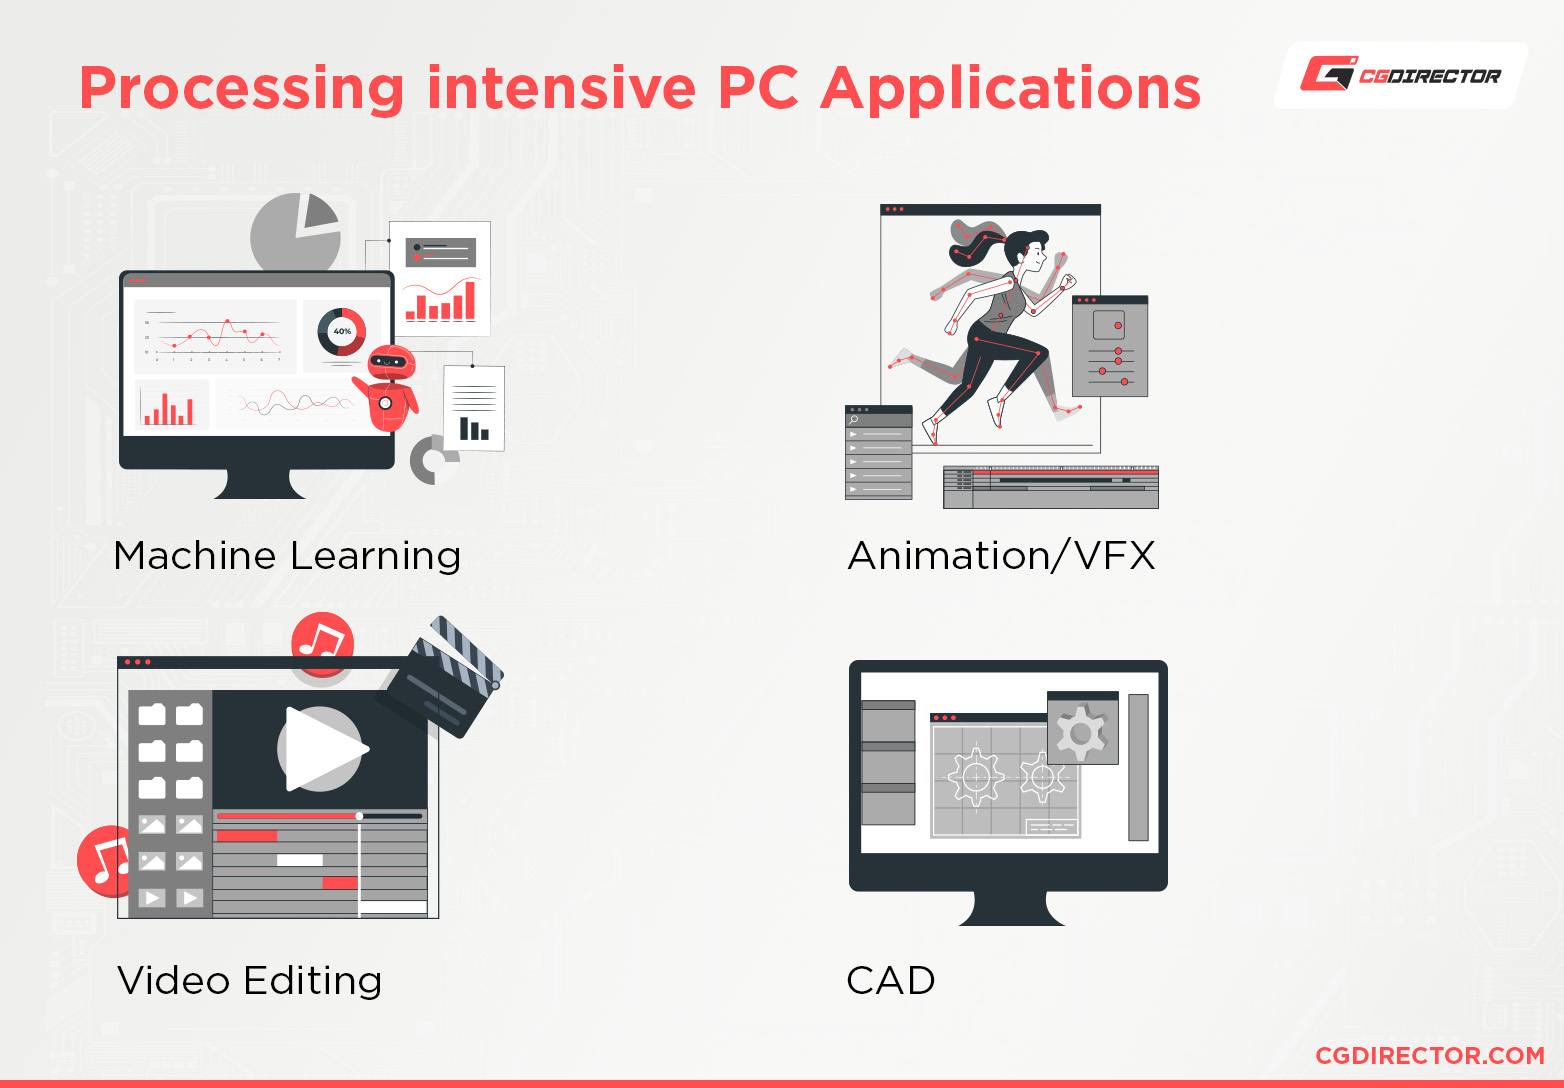 Processing intensive PC Applications